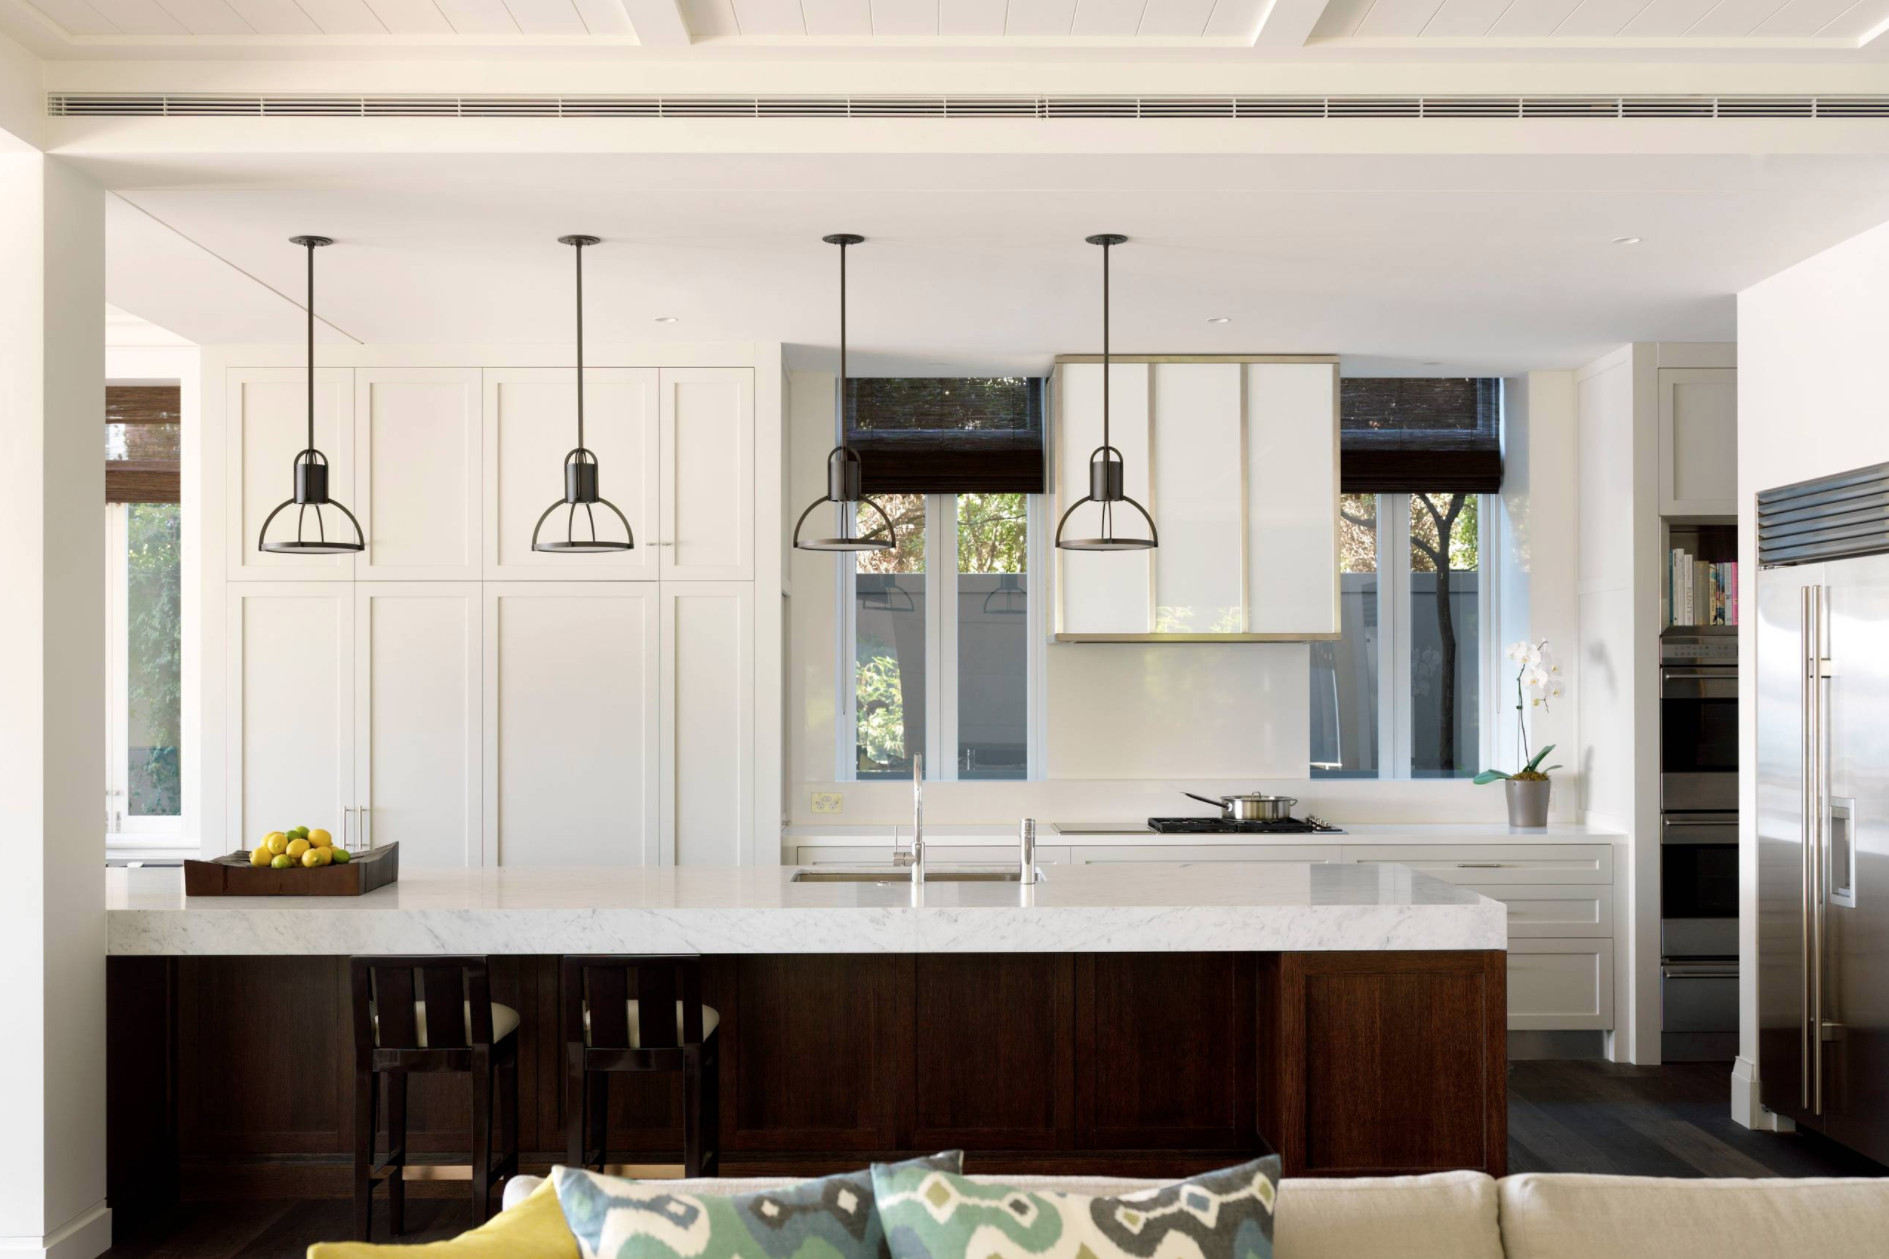 Lighting For Kitchen
 How to choose the right lighting for your kitchen